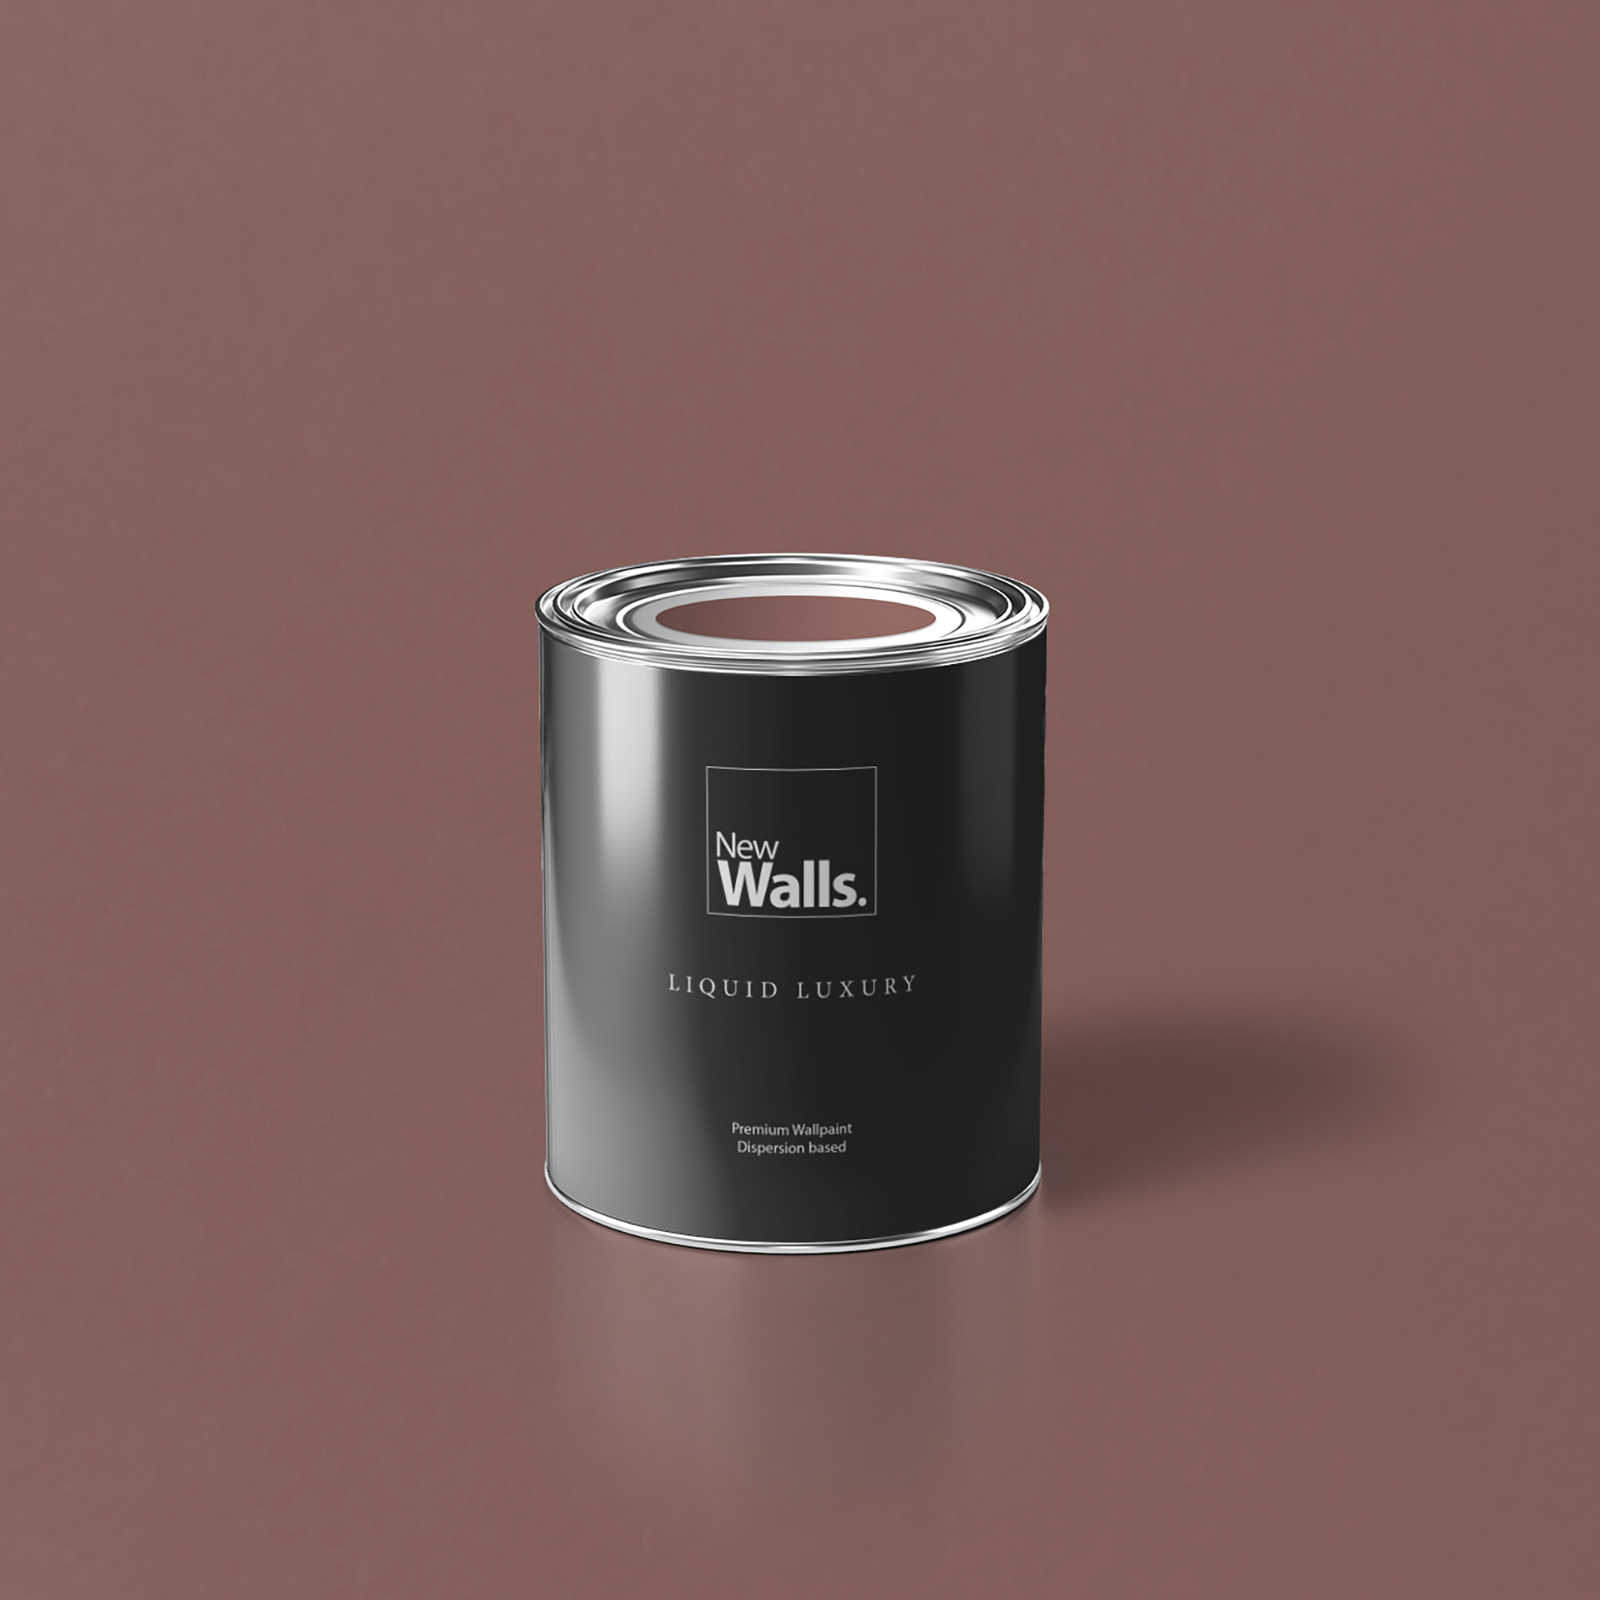         Premium Wall Paint Nature Dark Pink »Natural Nude« NW1012 – 1 litre
    